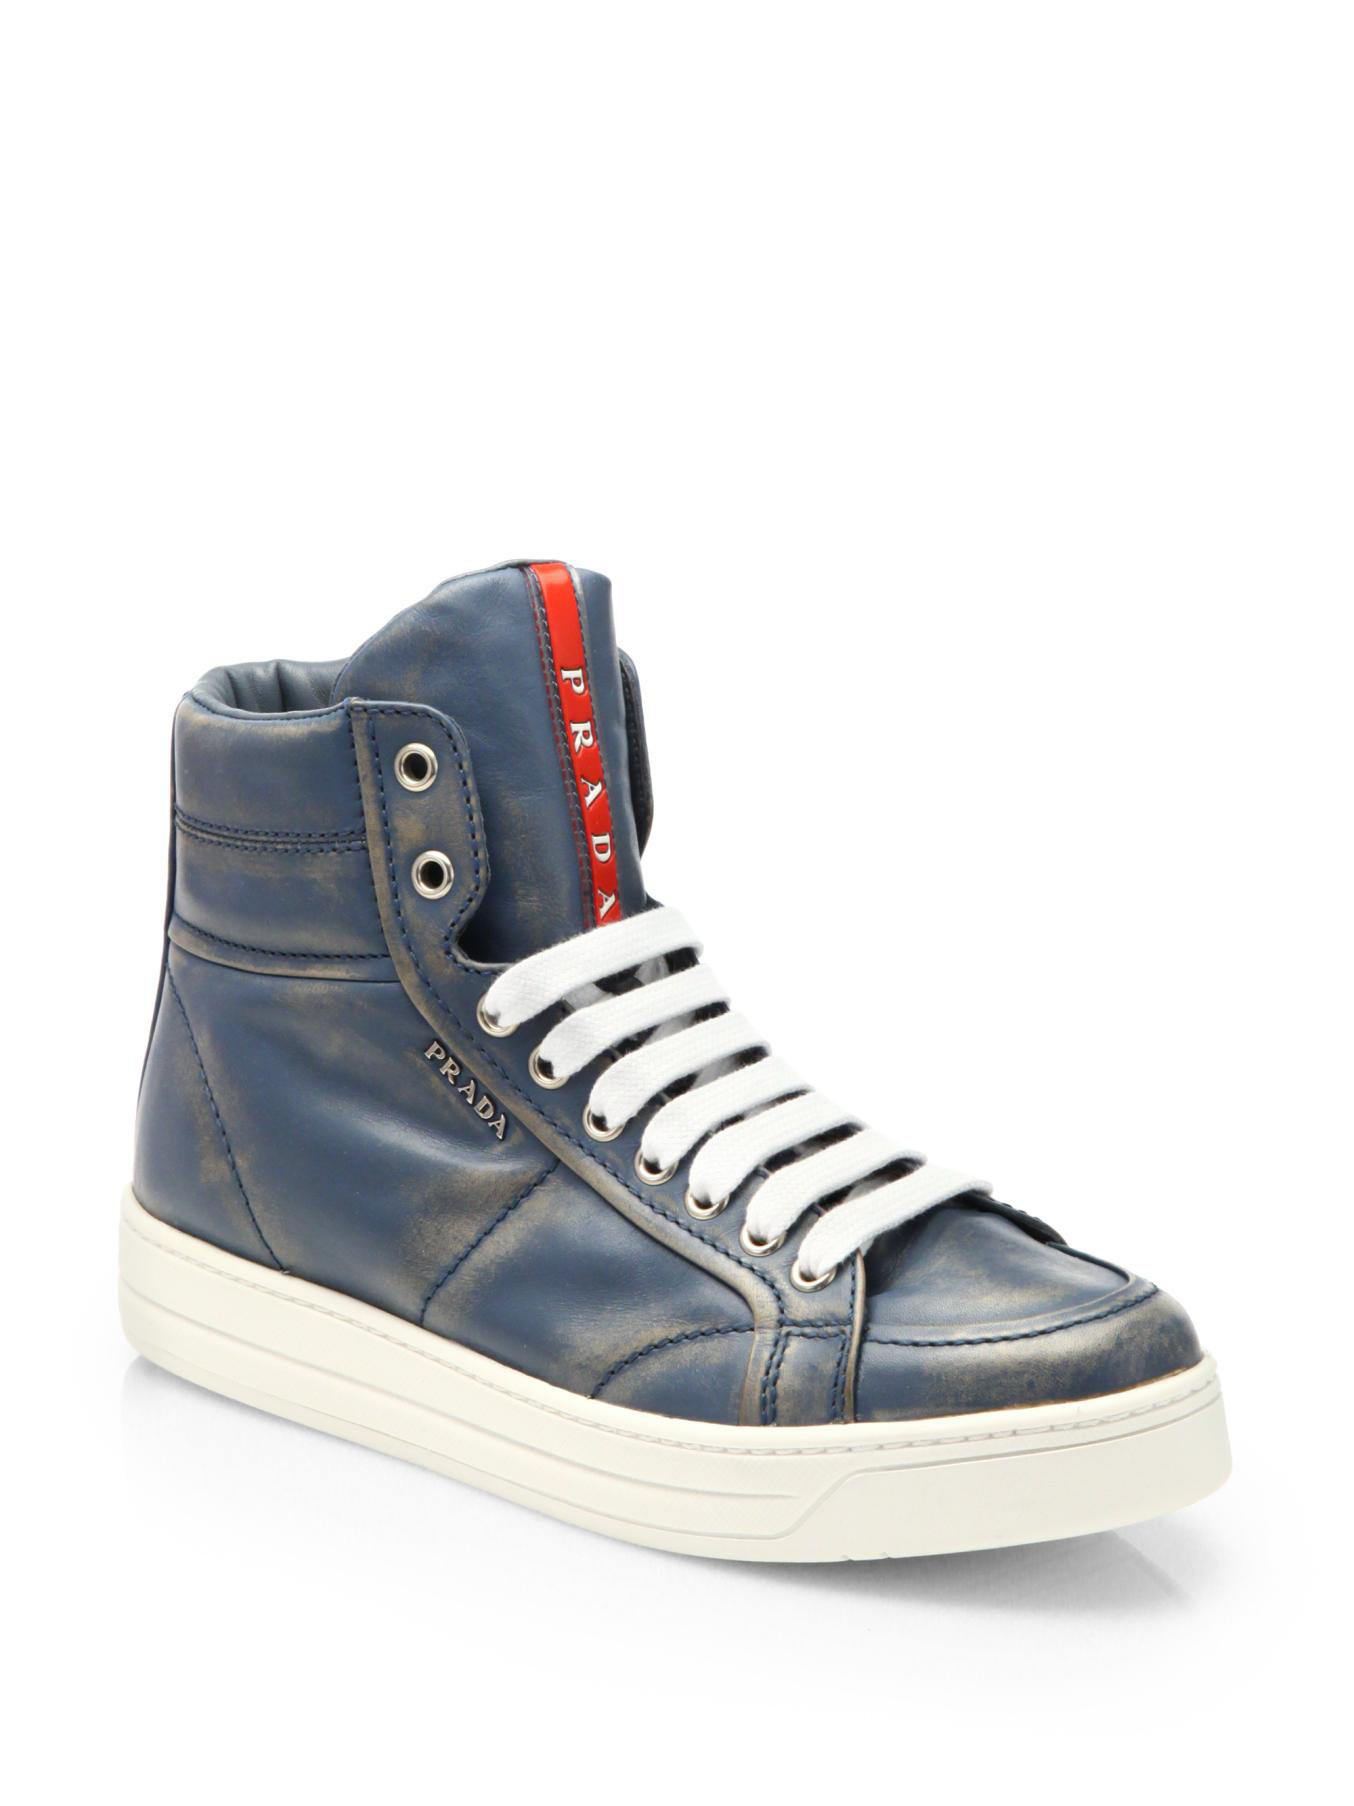 Lyst - Prada Leather Lace Up High Top Sneakers in Blue